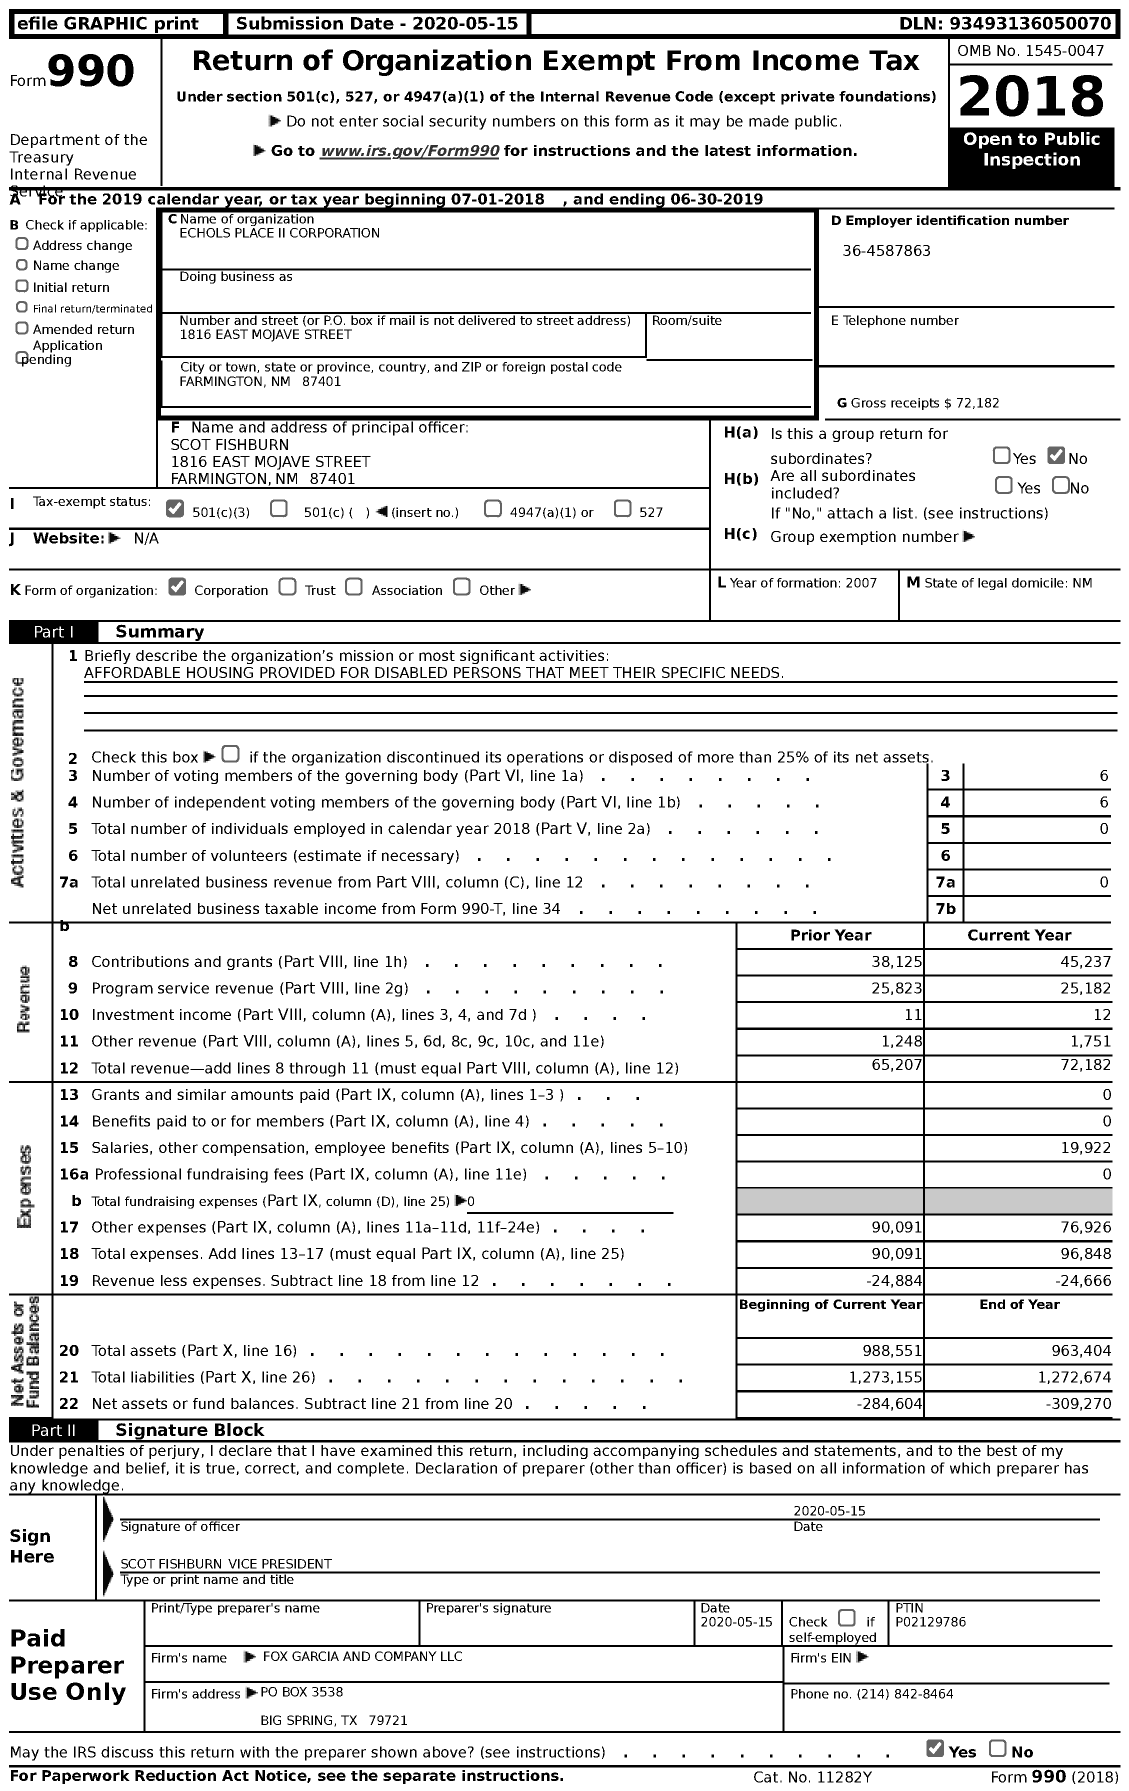 Image of first page of 2018 Form 990 for Echols Place Ii Corporation